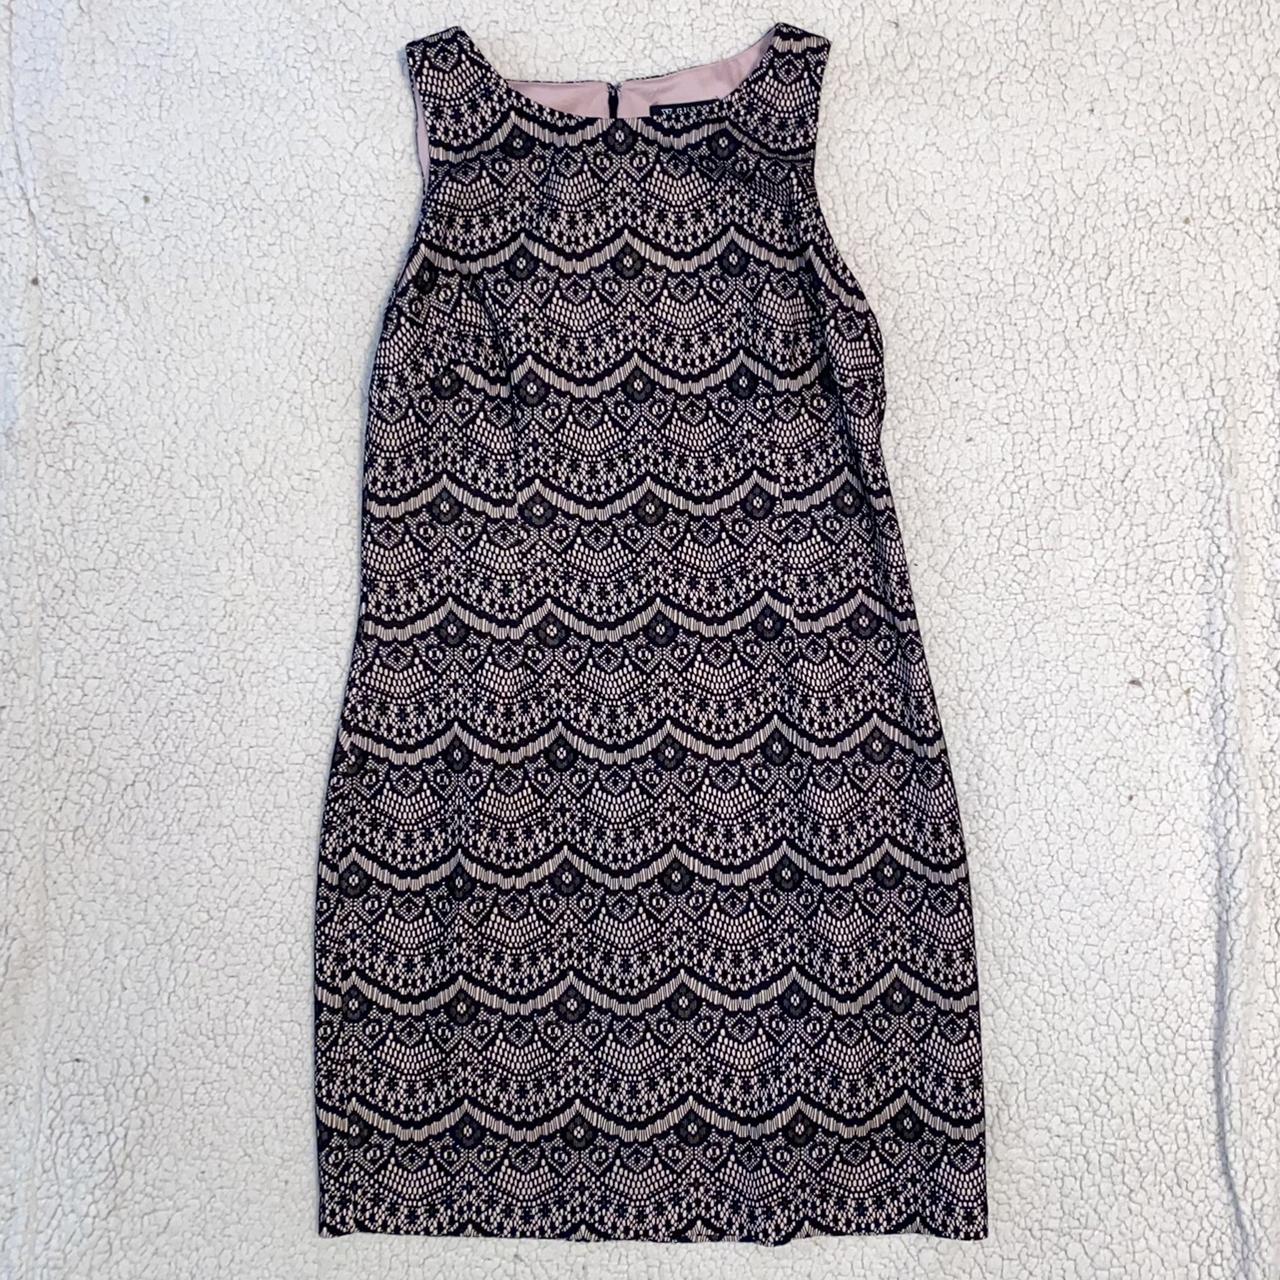 Guess Women's Black and Cream Dress